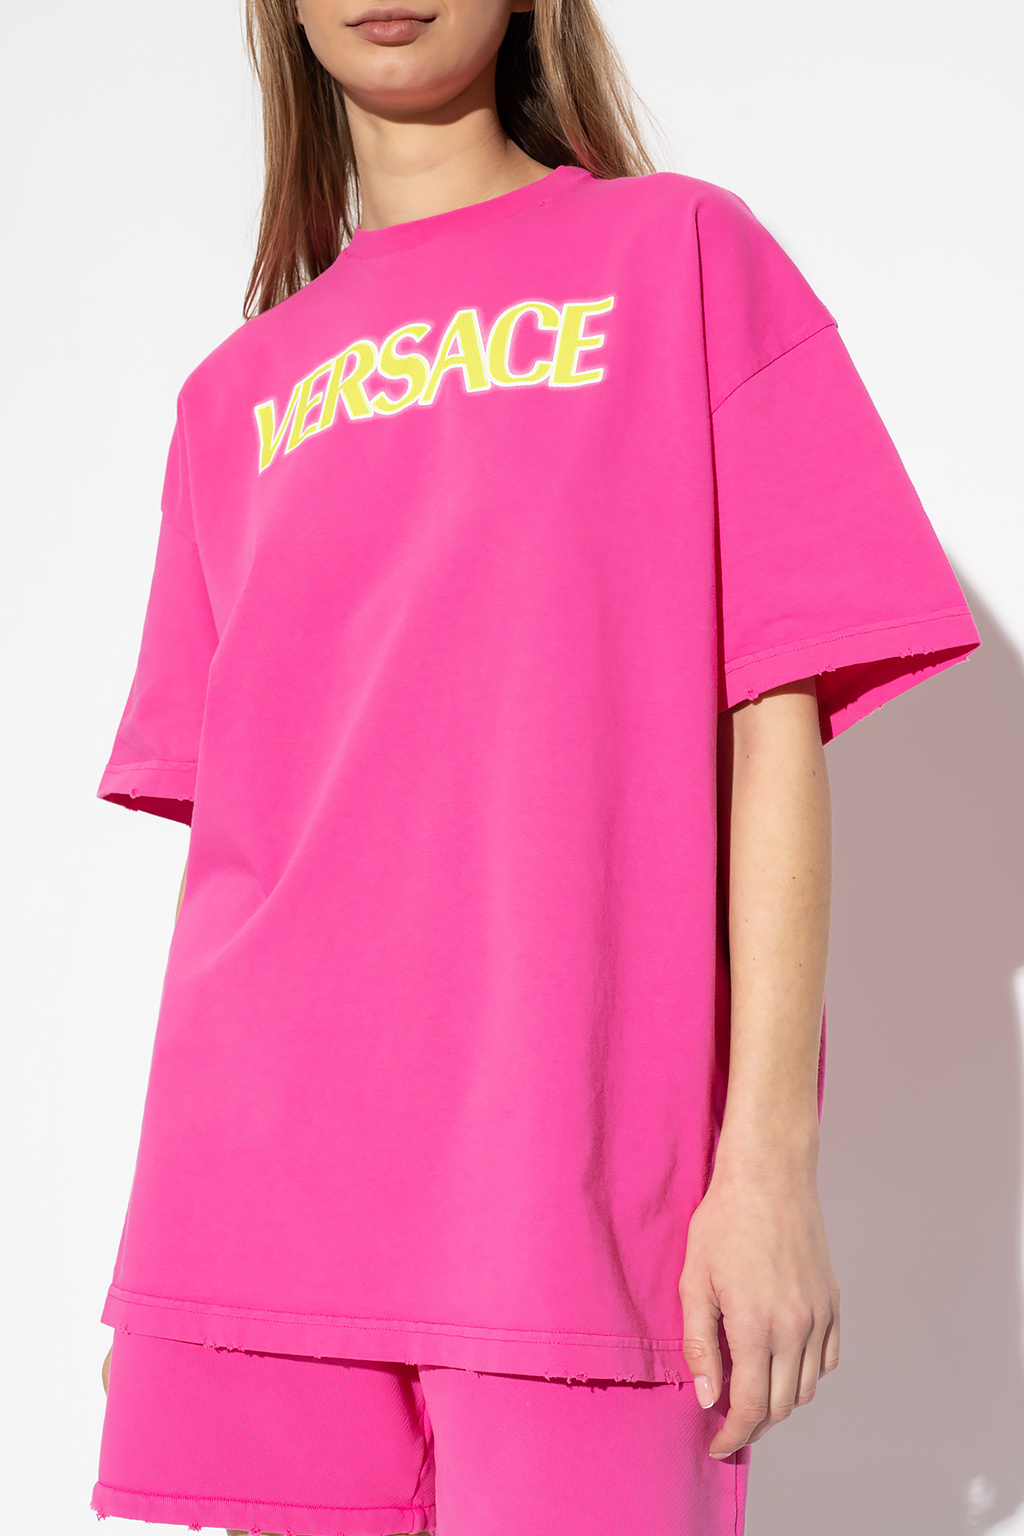 Versace Ideal T Shirts for lounging around